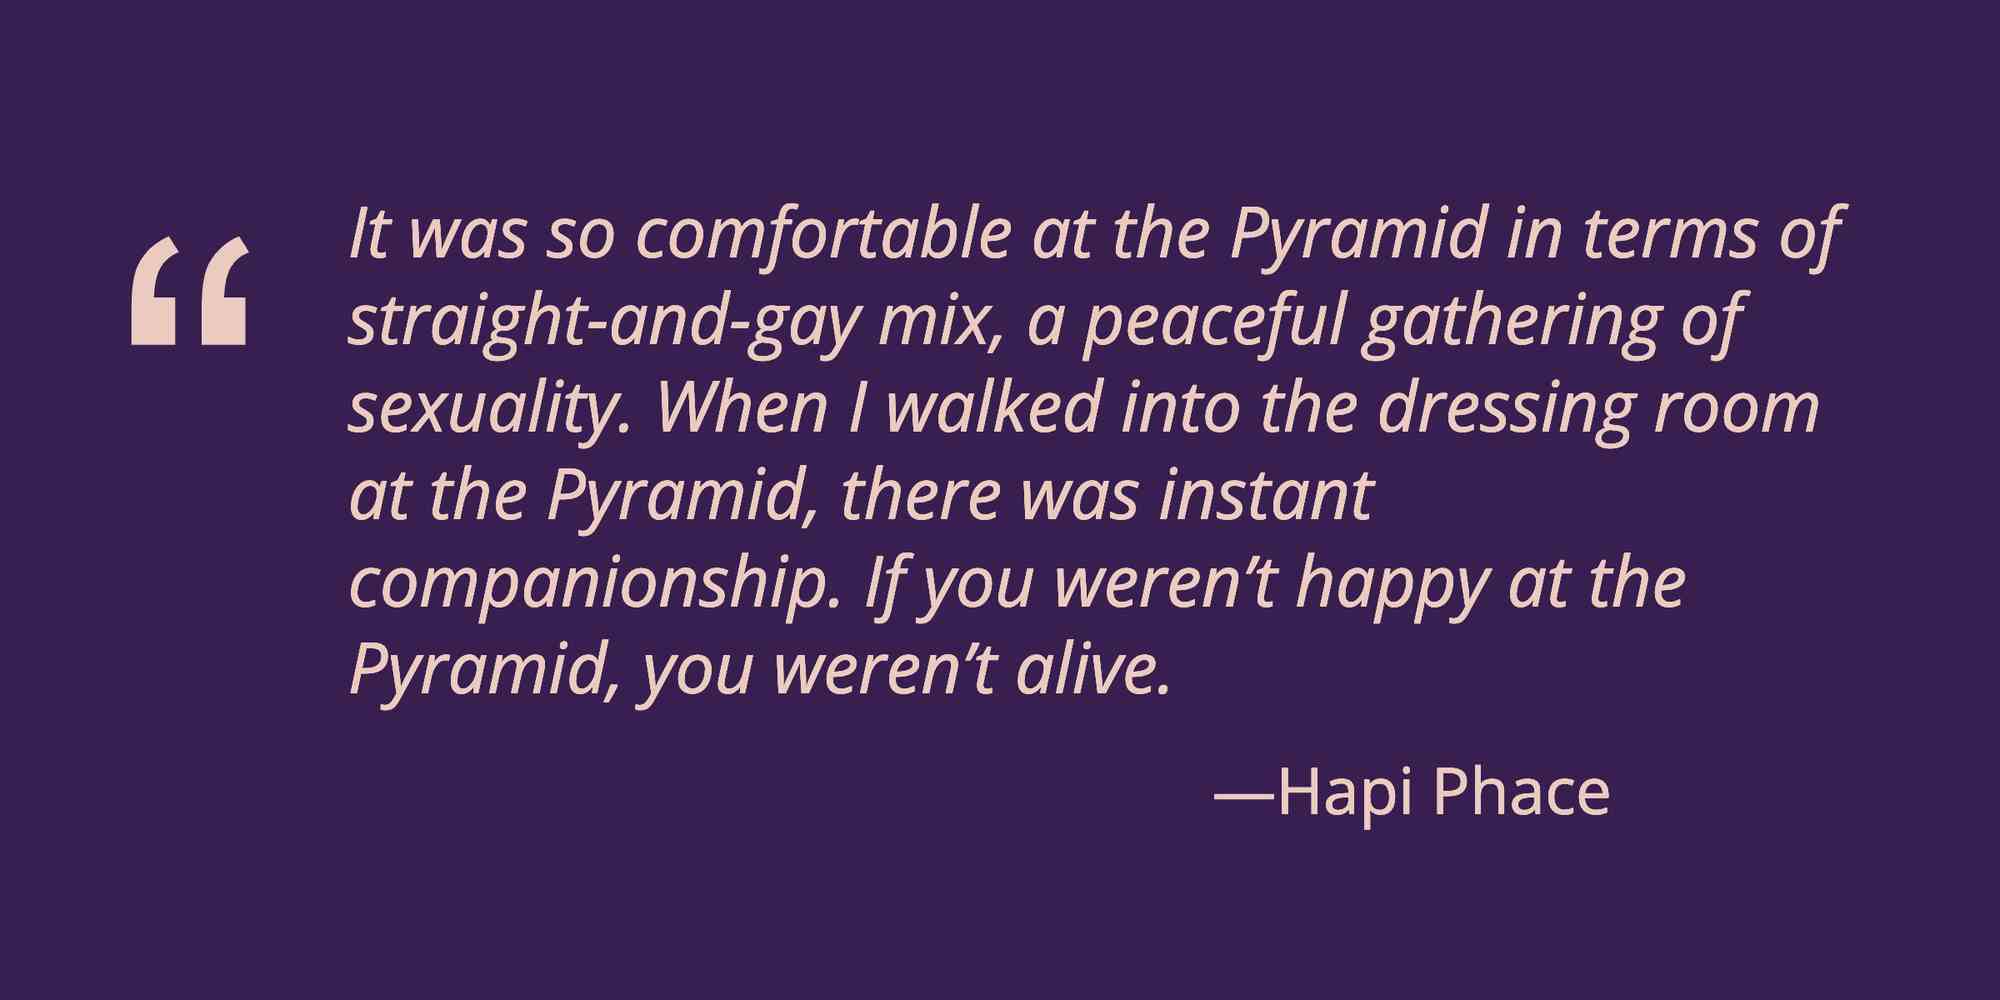 https://someseriousbusiness.org/product/we-started-a-nightclub-the-birth-of-the-pyramid-cocktail-lounge-as-told-by-those-who-lived-it/